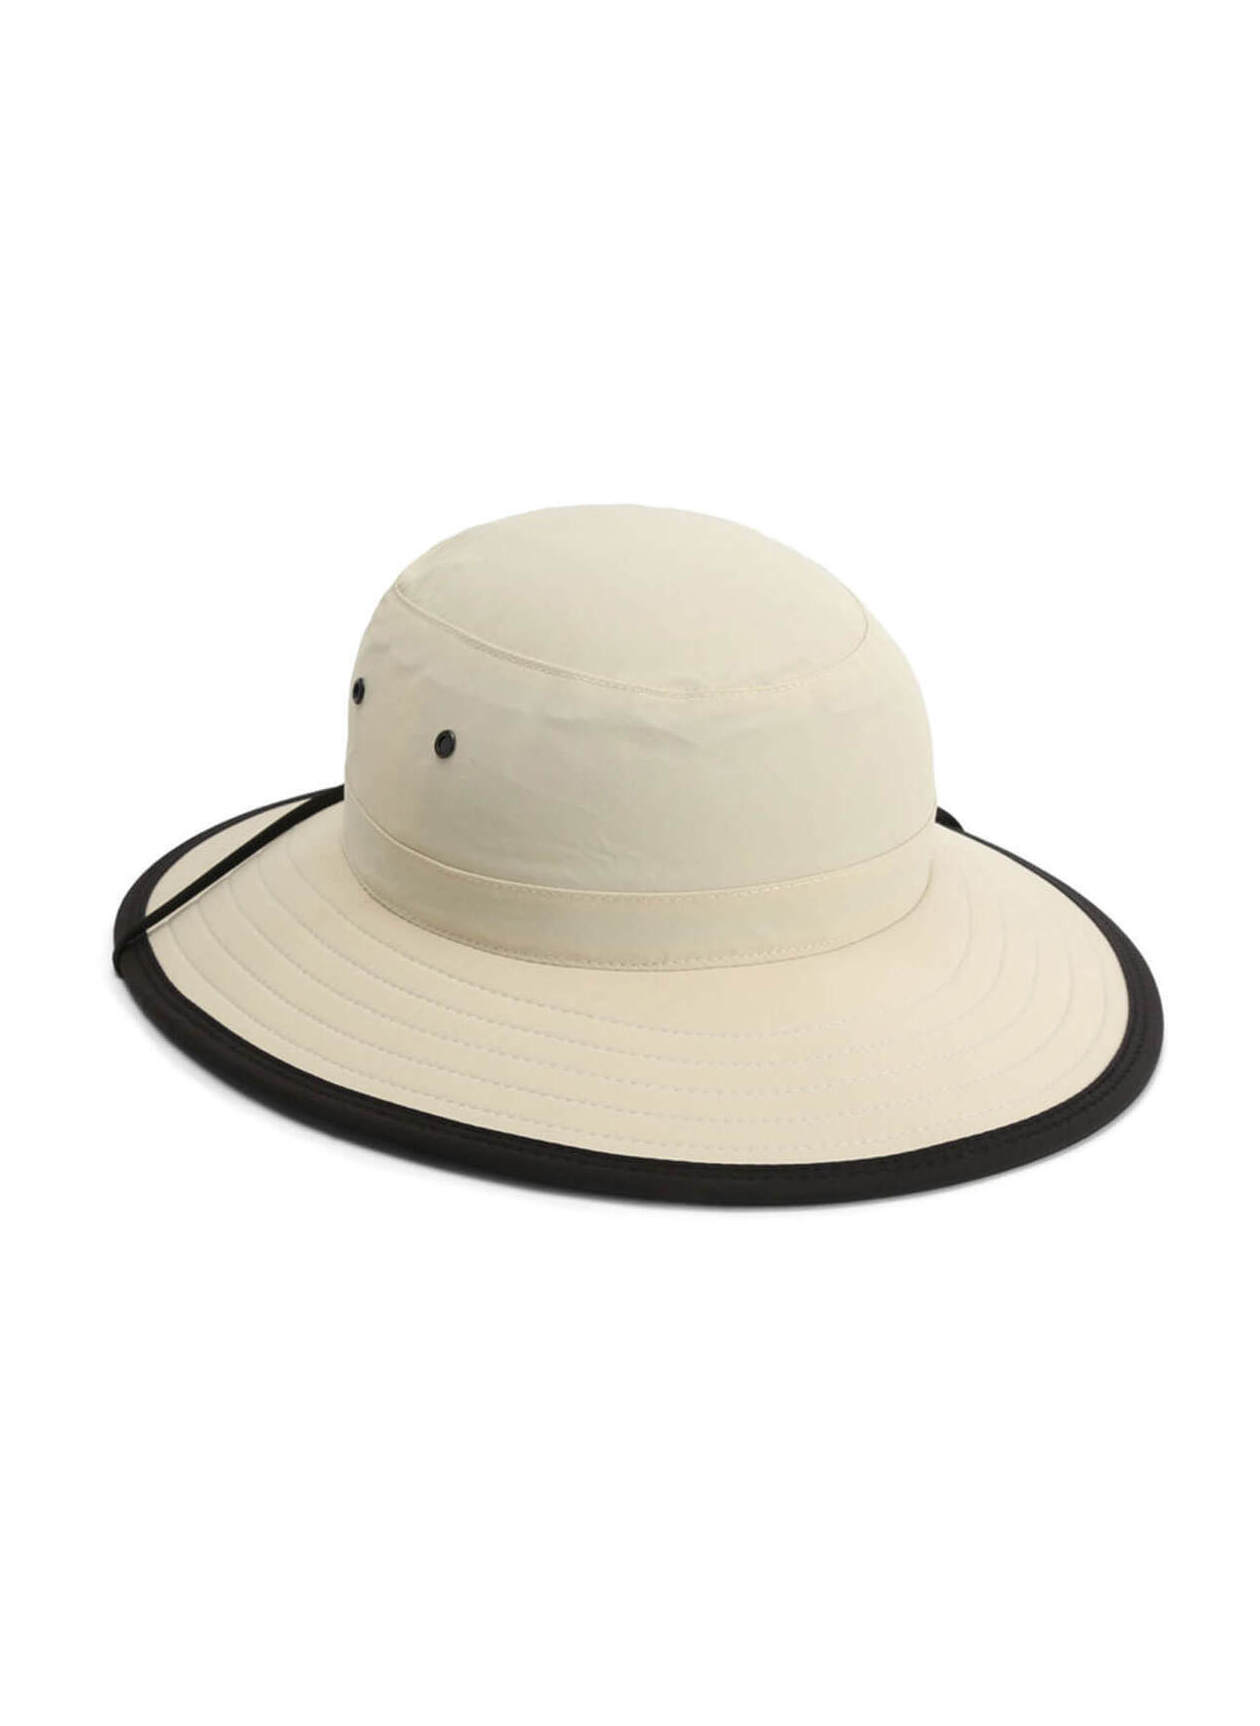 Imperial Sand / Black The Rabbit Island Sun Protection Hat